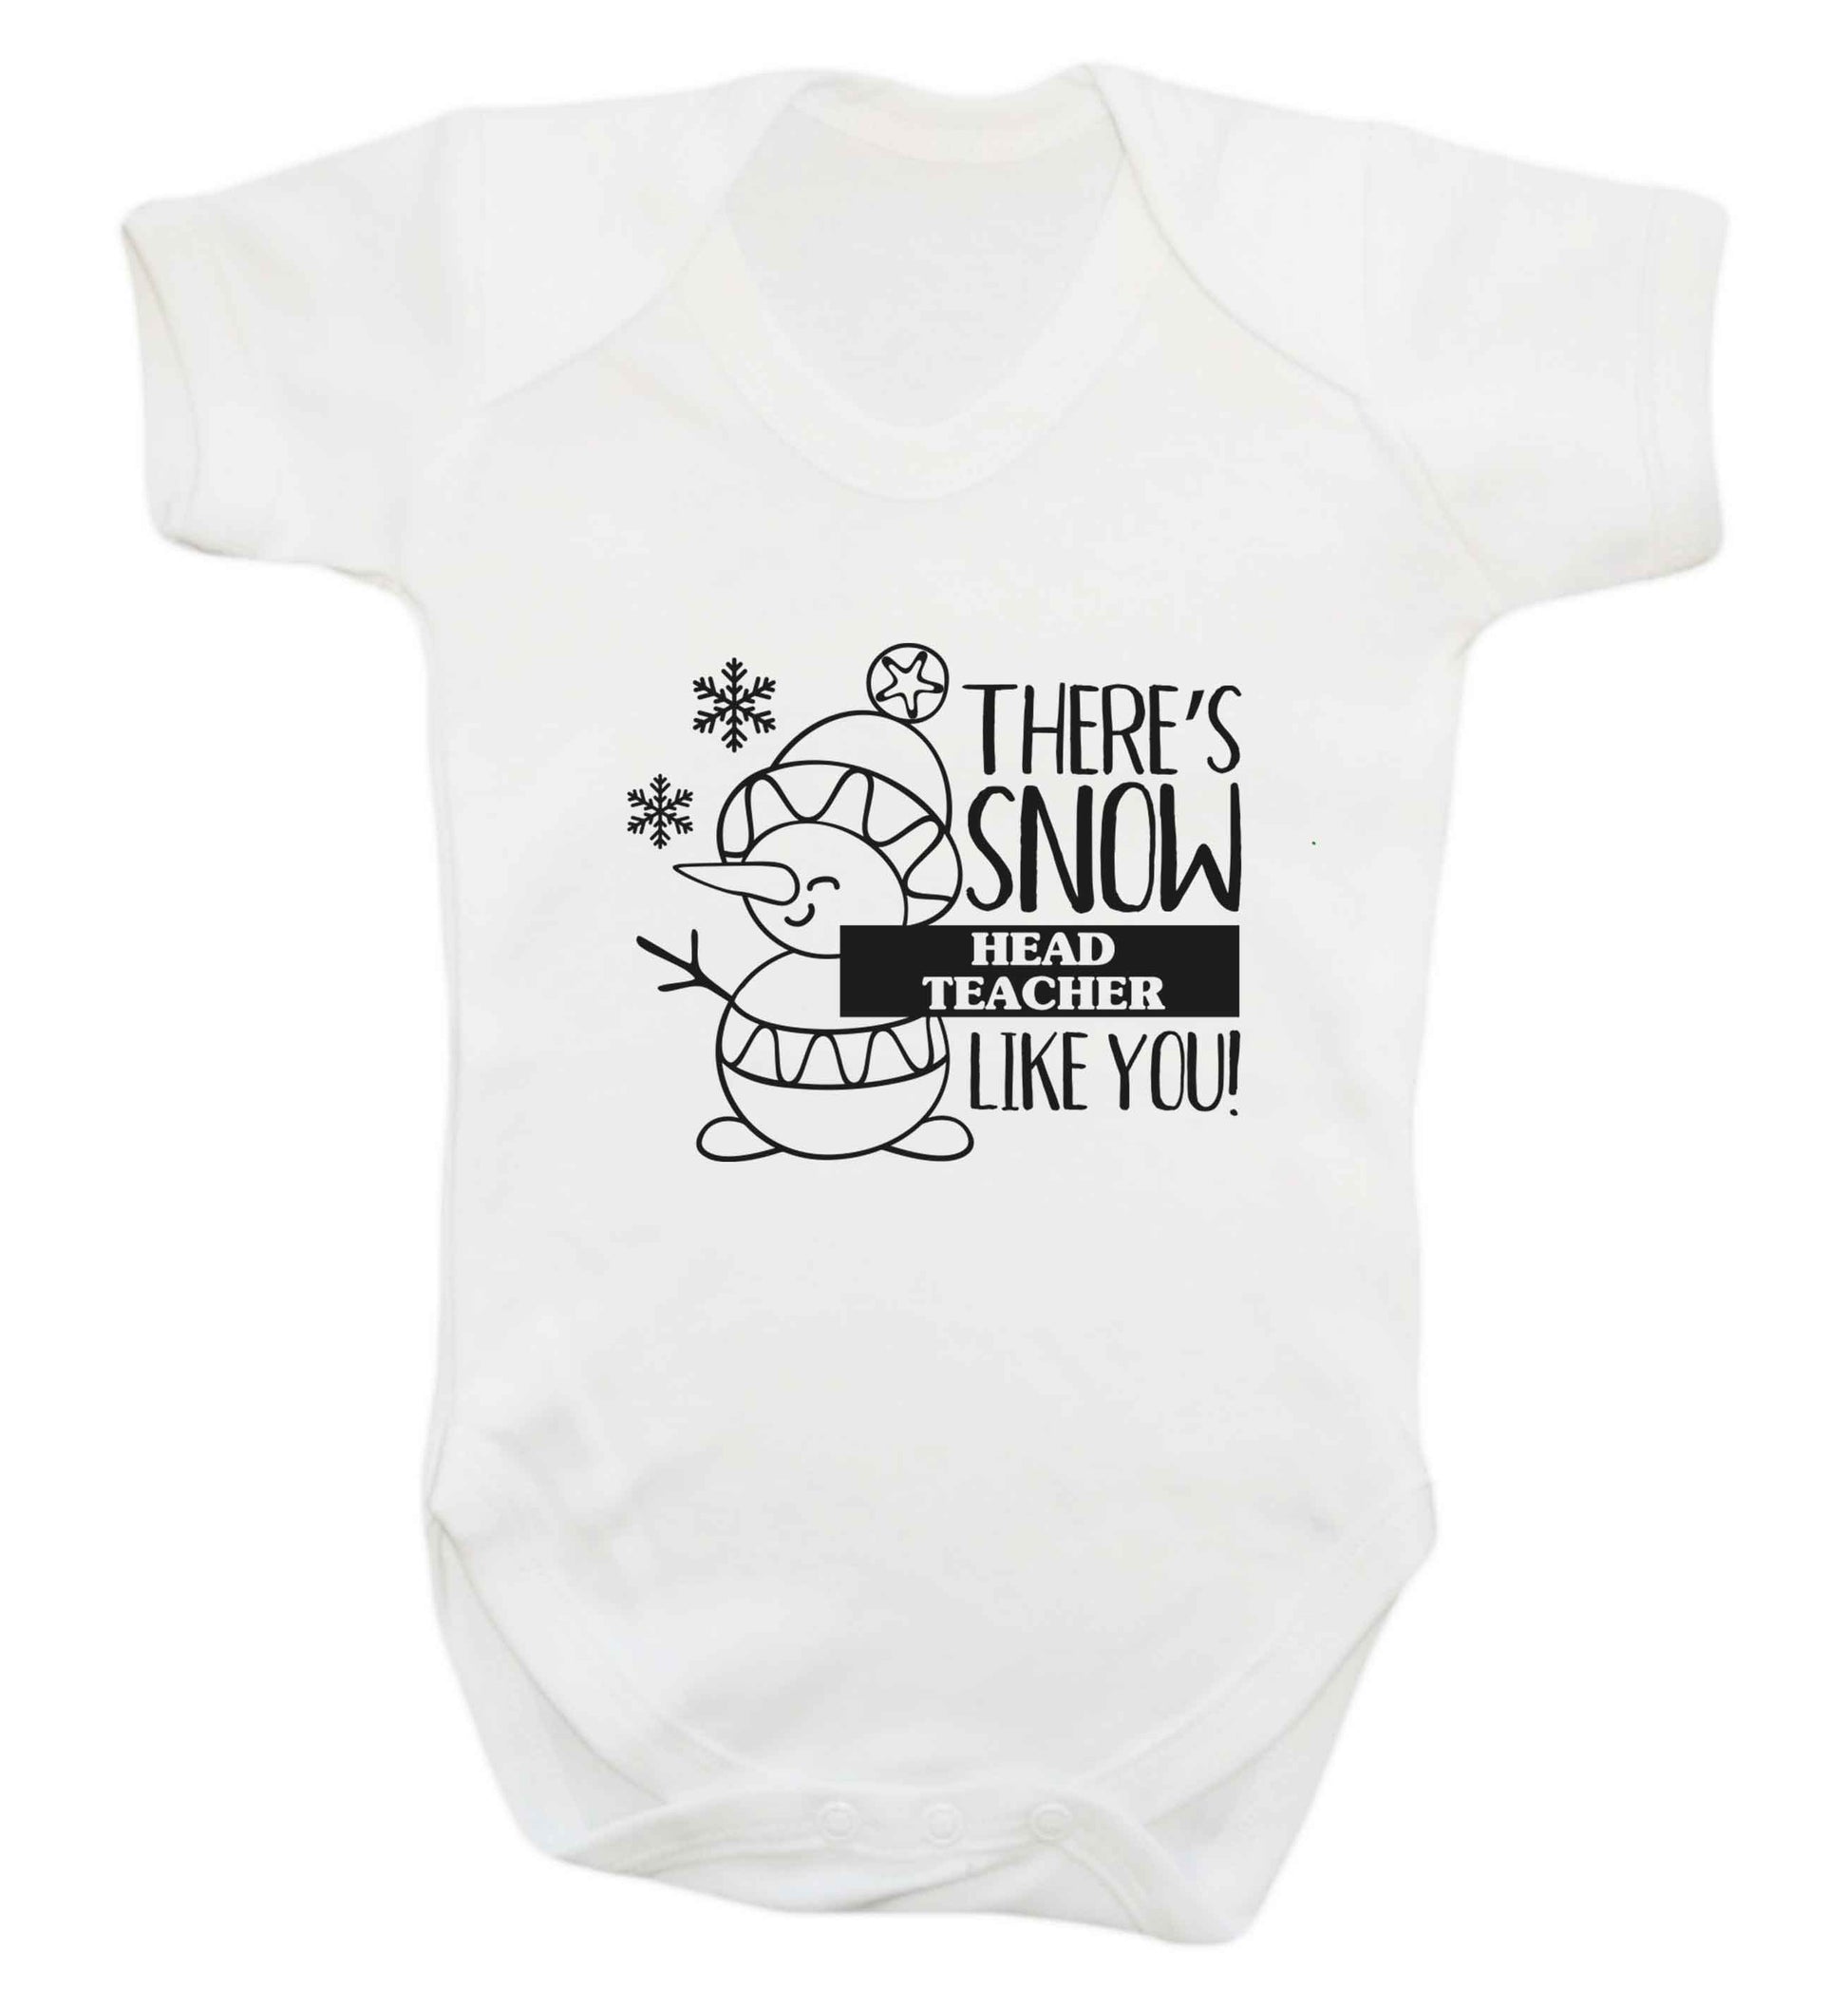 There's snow head teacher like you baby vest white 18-24 months